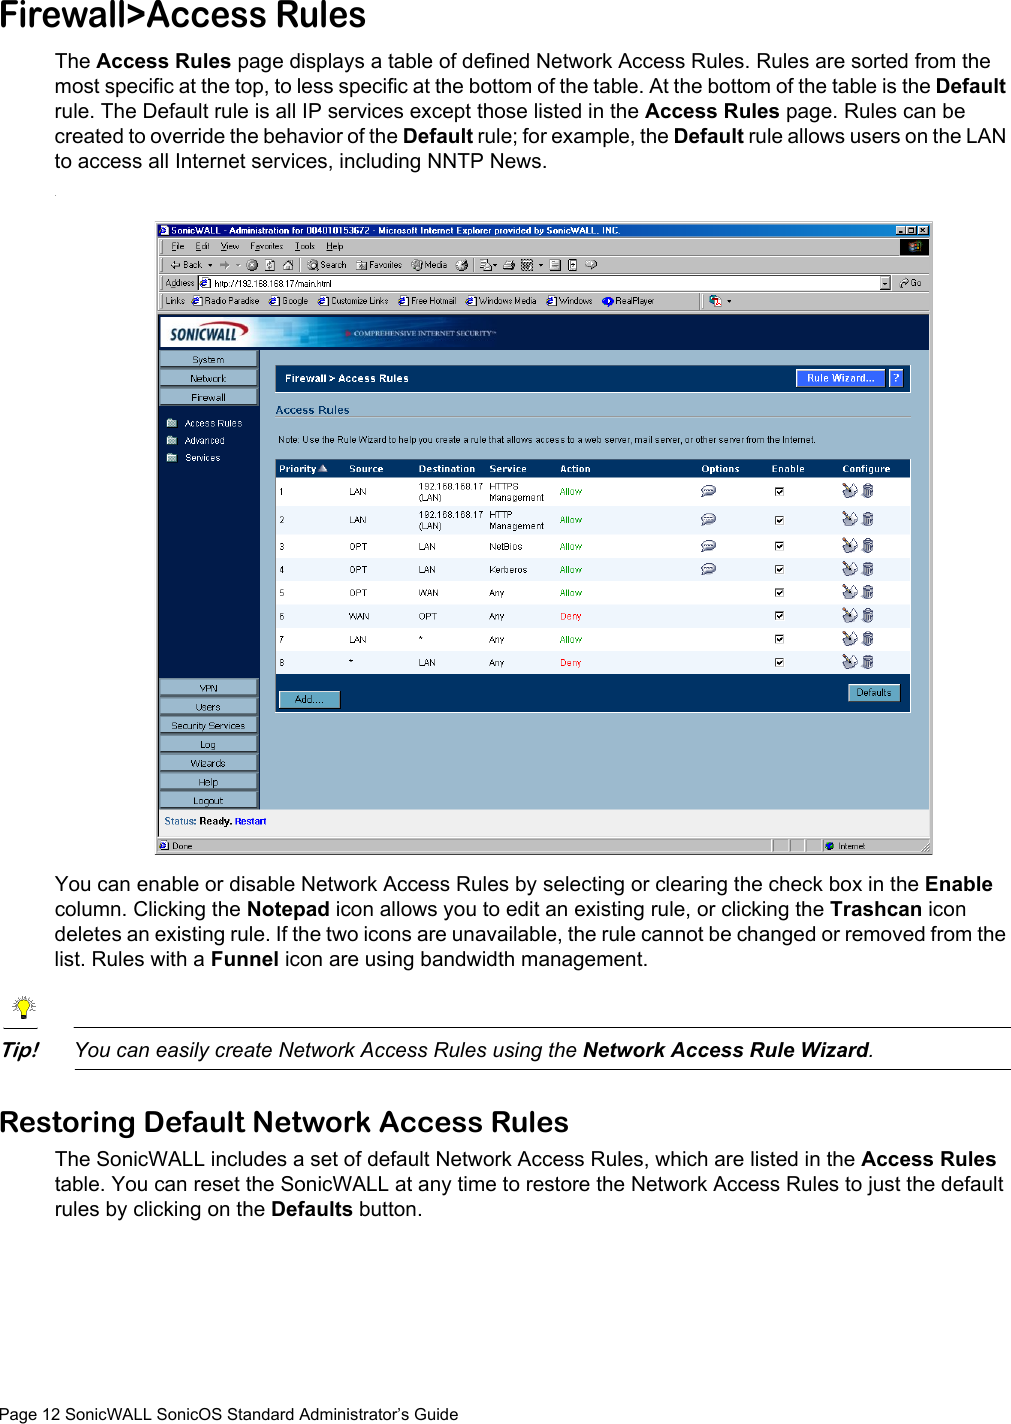 Page 12 SonicWALL SonicOS Standard Administrator’s GuideFirewall&gt;Access RulesThe Access Rules page displays a table of defined Network Access Rules. Rules are sorted from the most specific at the top, to less specific at the bottom of the table. At the bottom of the table is the Default rule. The Default rule is all IP services except those listed in the Access Rules page. Rules can be created to override the behavior of the Default rule; for example, the Default rule allows users on the LAN to access all Internet services, including NNTP News..You can enable or disable Network Access Rules by selecting or clearing the check box in the Enable column. Clicking the Notepad icon allows you to edit an existing rule, or clicking the Trashcan icon deletes an existing rule. If the two icons are unavailable, the rule cannot be changed or removed from the list. Rules with a Funnel icon are using bandwidth management.Tip!You can easily create Network Access Rules using the Network Access Rule Wizard.Restoring Default Network Access RulesThe SonicWALL includes a set of default Network Access Rules, which are listed in the Access Rules table. You can reset the SonicWALL at any time to restore the Network Access Rules to just the default rules by clicking on the Defaults button.